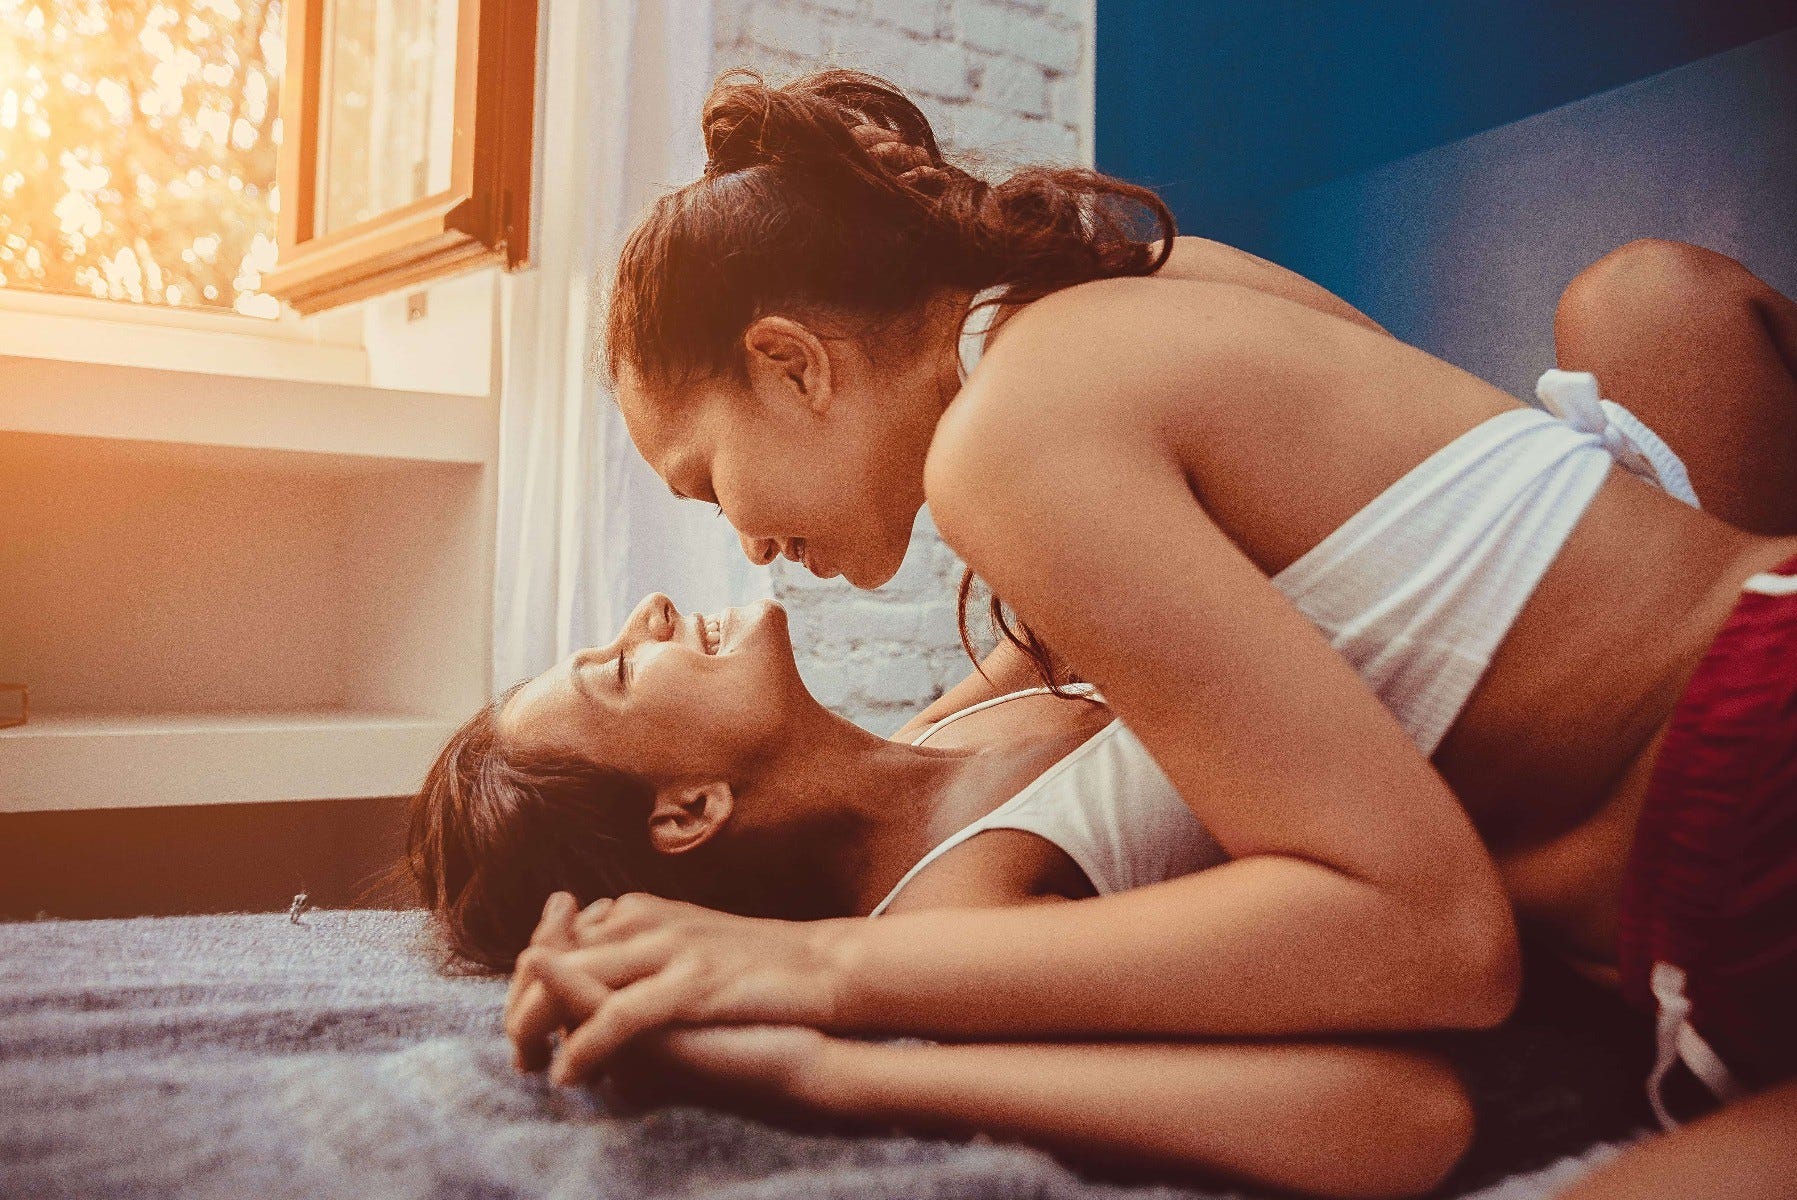 Two women having an intimate moment in bed